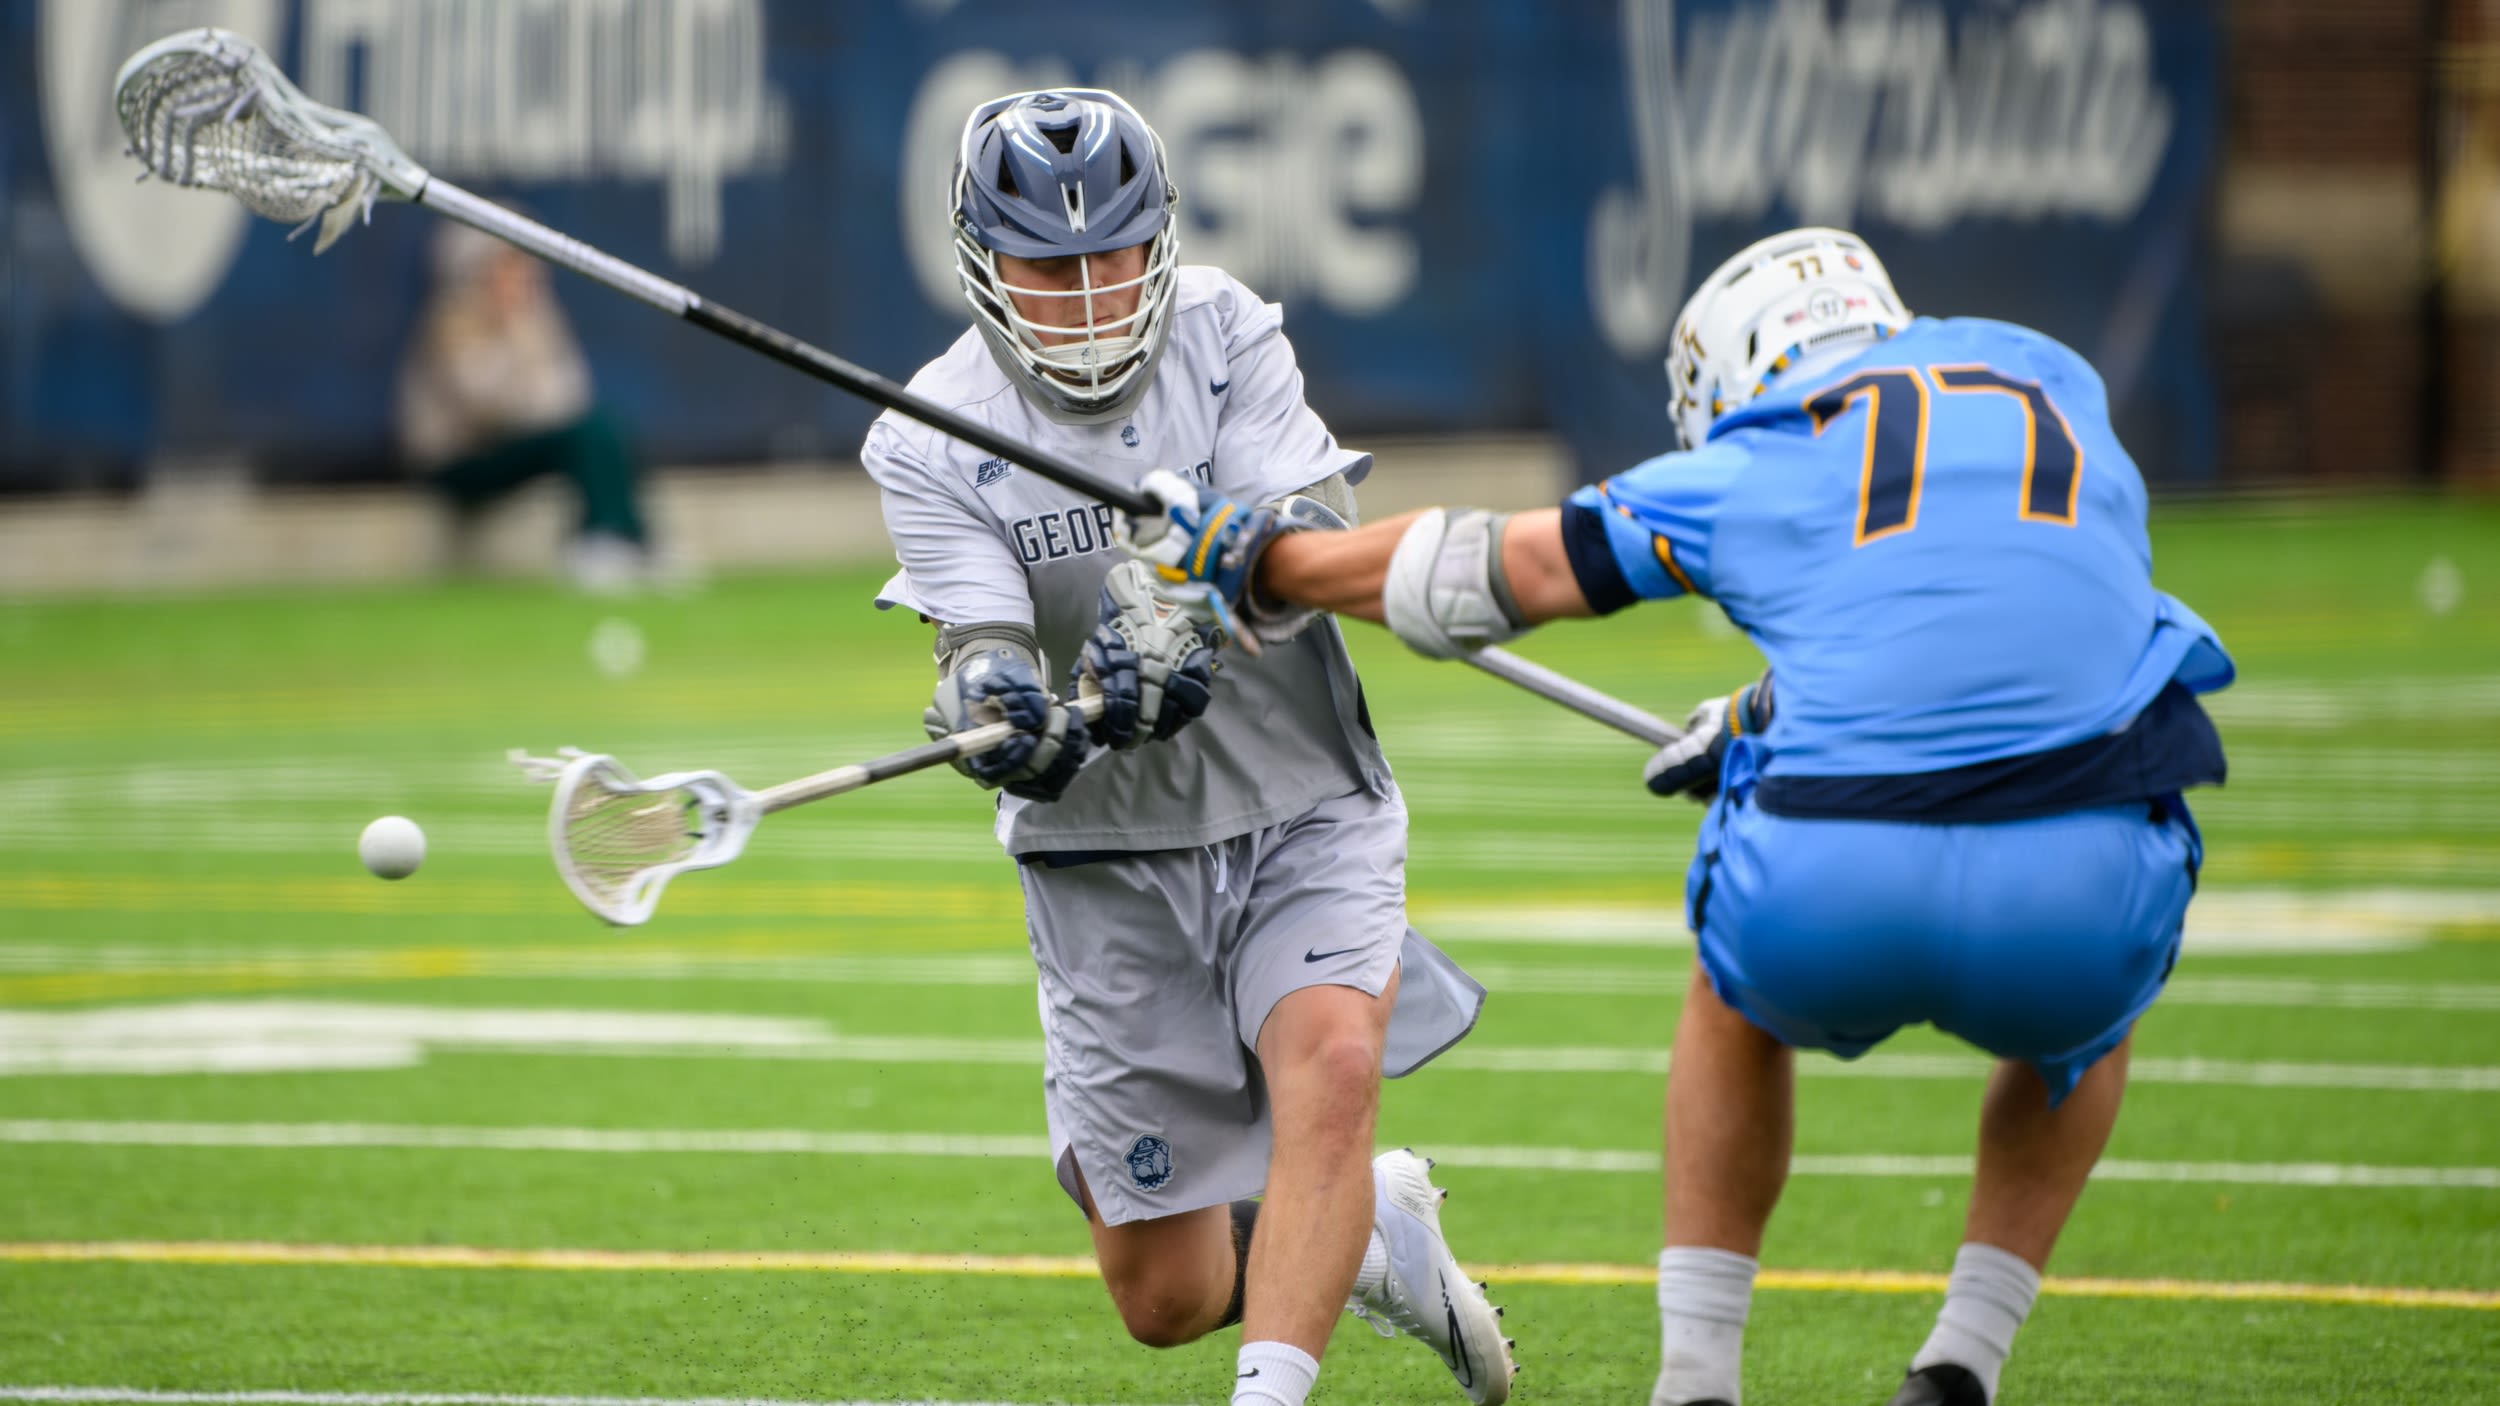 Graham Bundy Jr. is a steadying influence for Georgetown men’s lacrosse